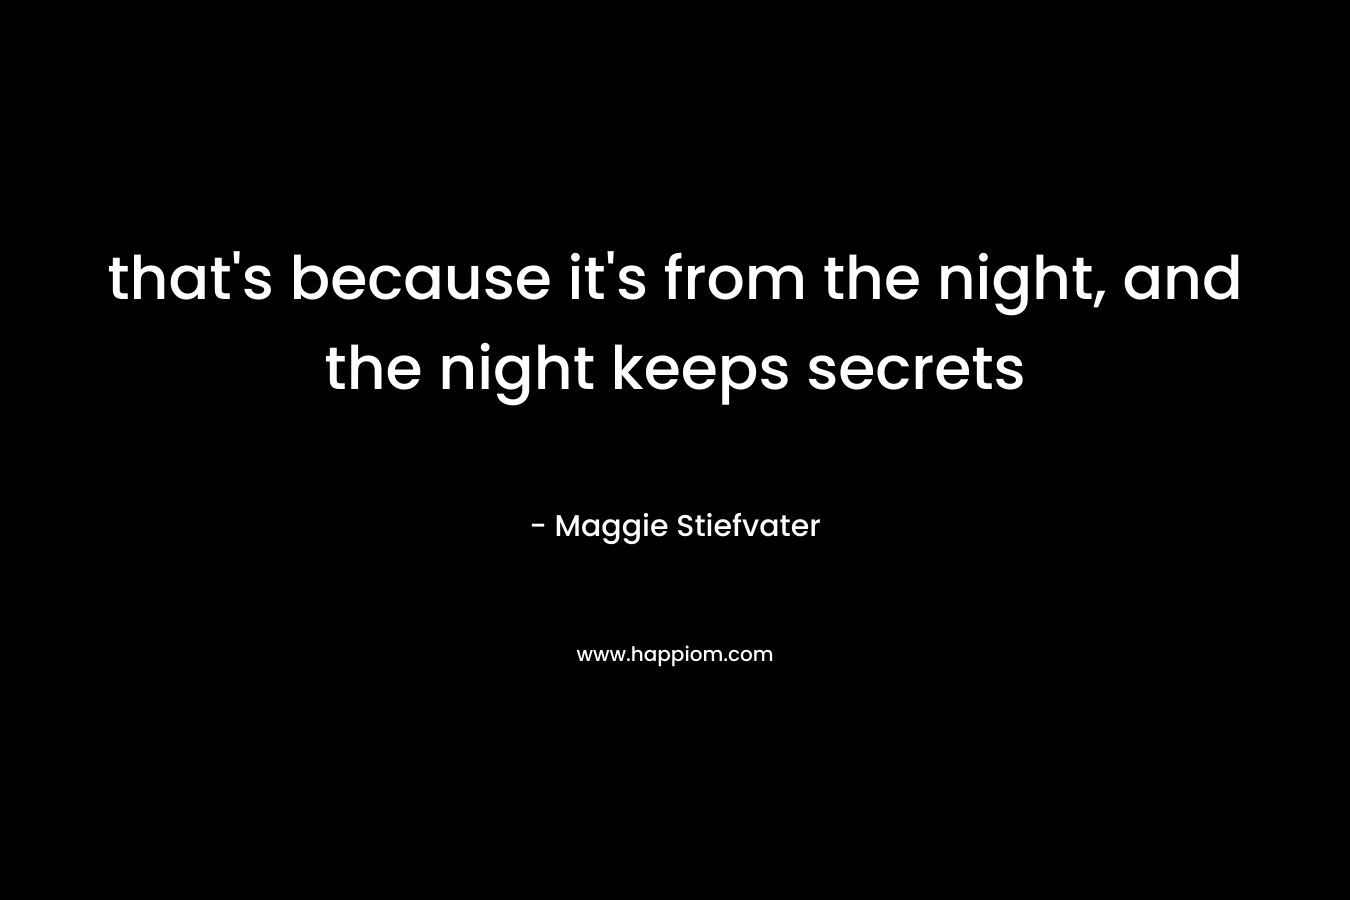 that's because it's from the night, and the night keeps secrets